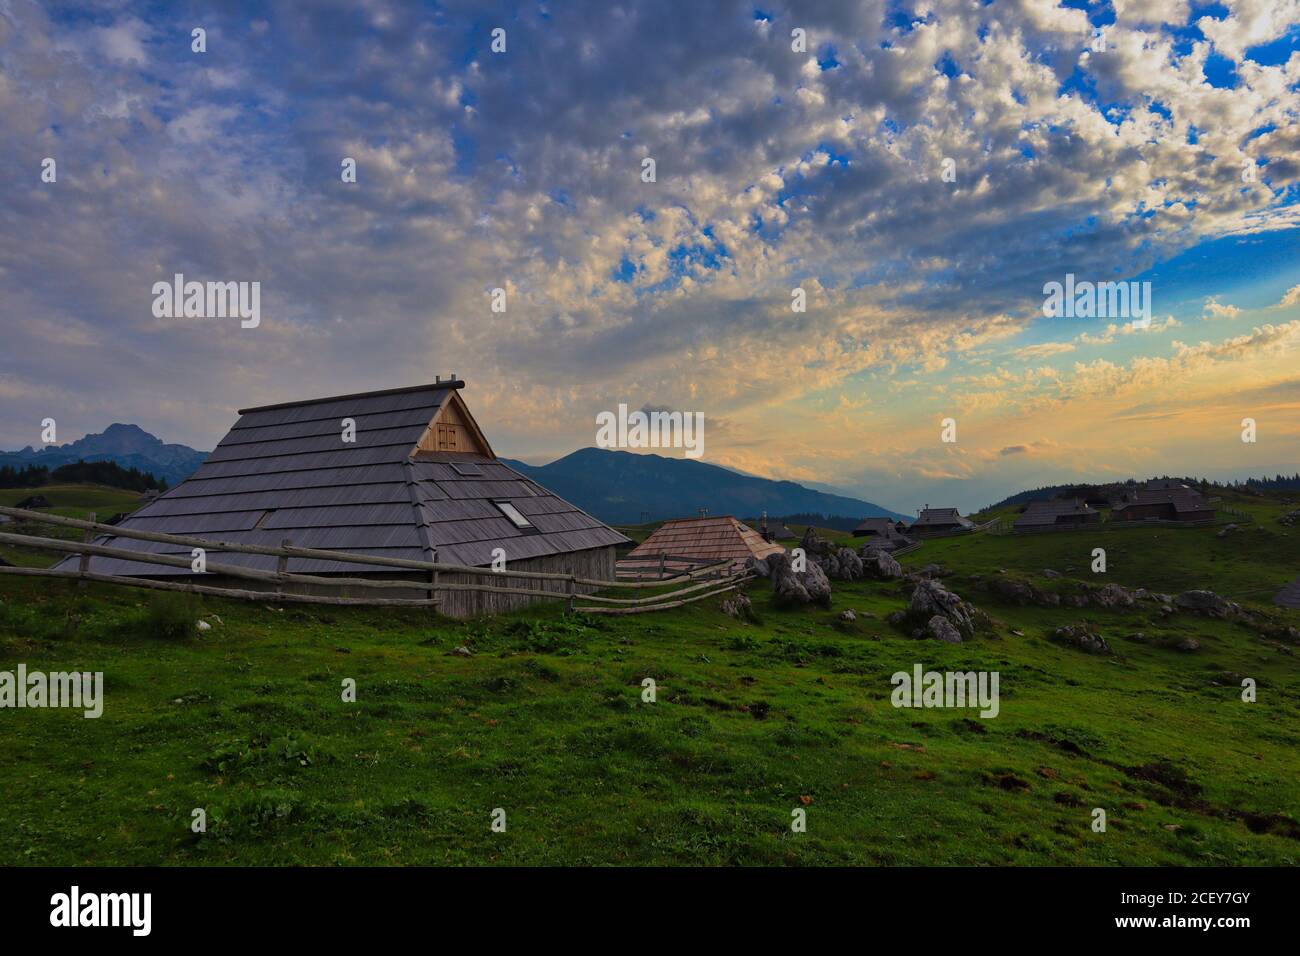 Wooden hut in Velika planina during sunrise. Beautiful photo of agriculture landscape with the view of green grass, wooden cottage and cloudy sky. Stock Photo